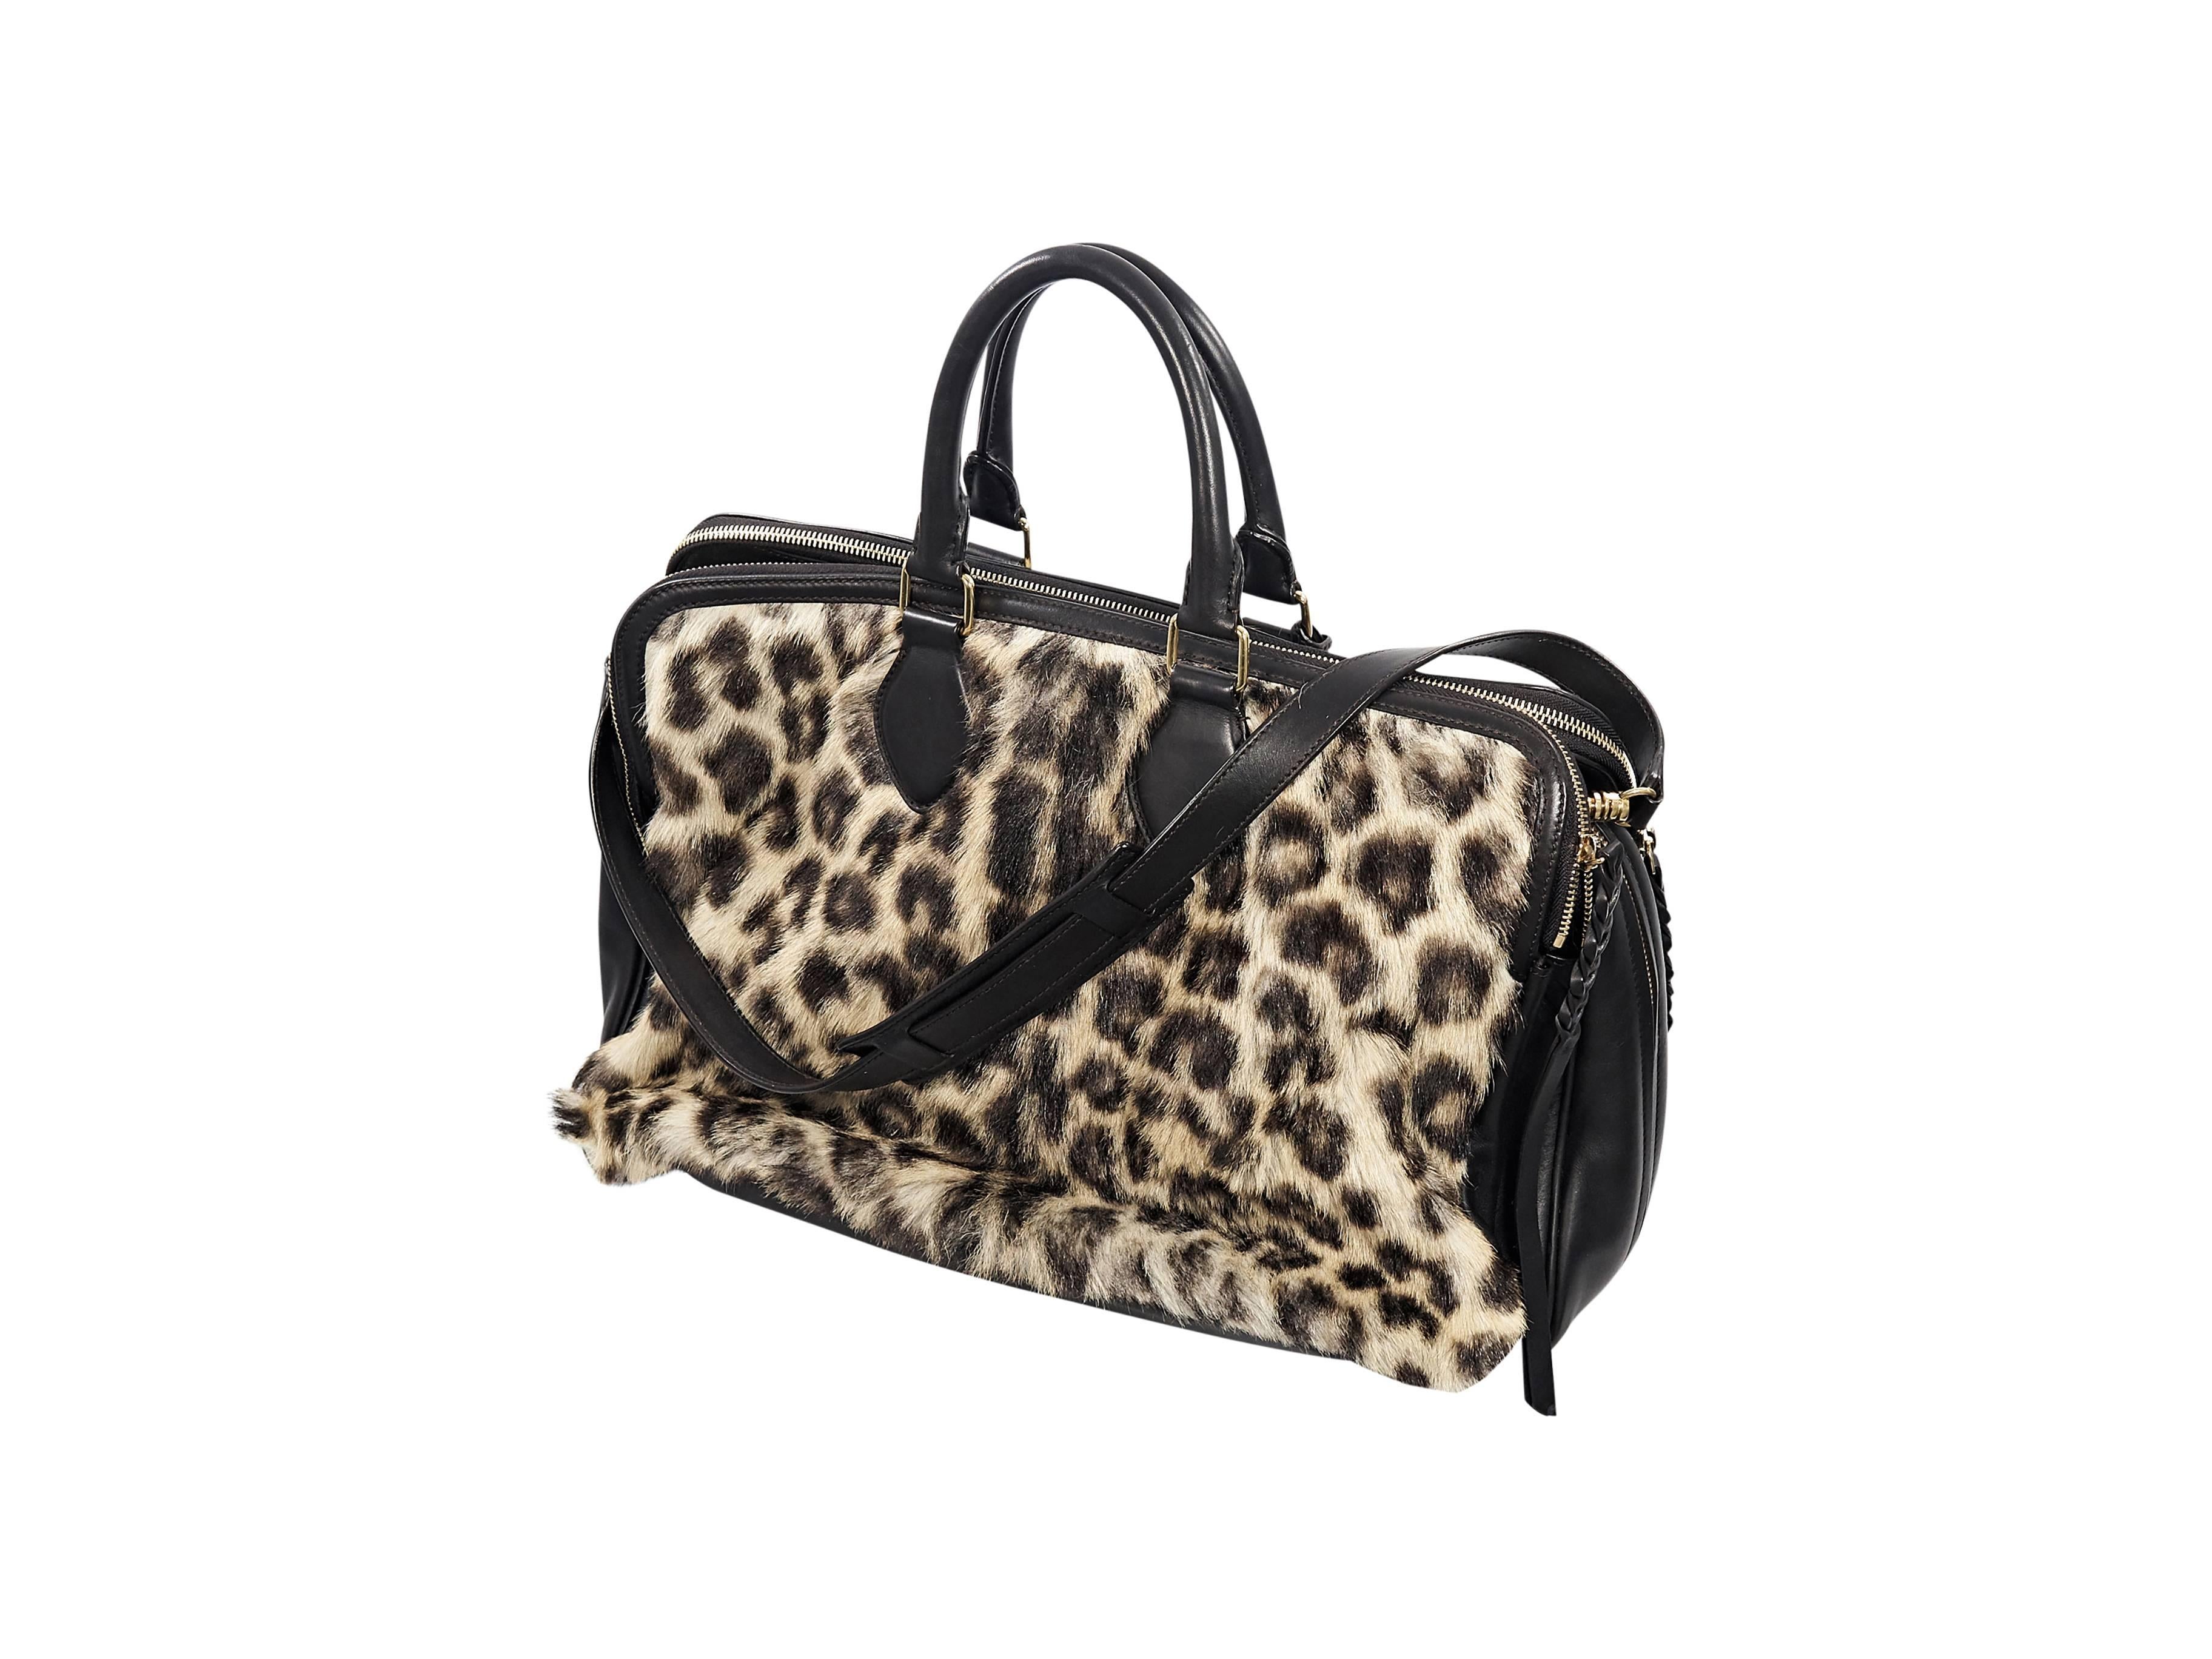 Product details:  Leopard-print goat fur satchel with black leather by Celine.  Top carry handles.  Detachable shoulder strap.  Three main compartments.  Top zip closures.  Lined interiors with slide pockets.  Goldtone hardware.  16